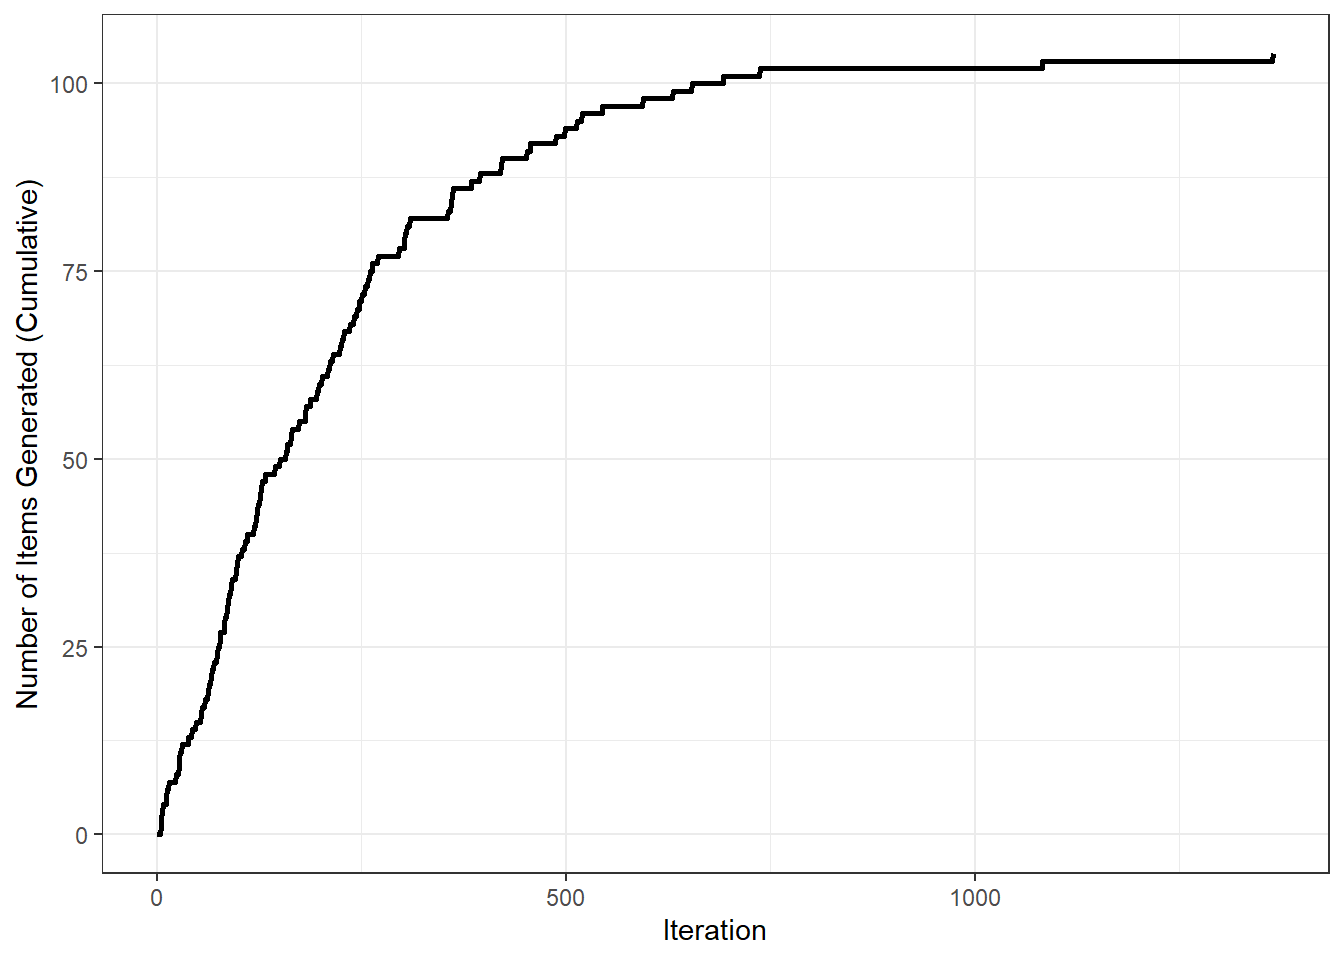 The cumulative number of items generated per iteration.